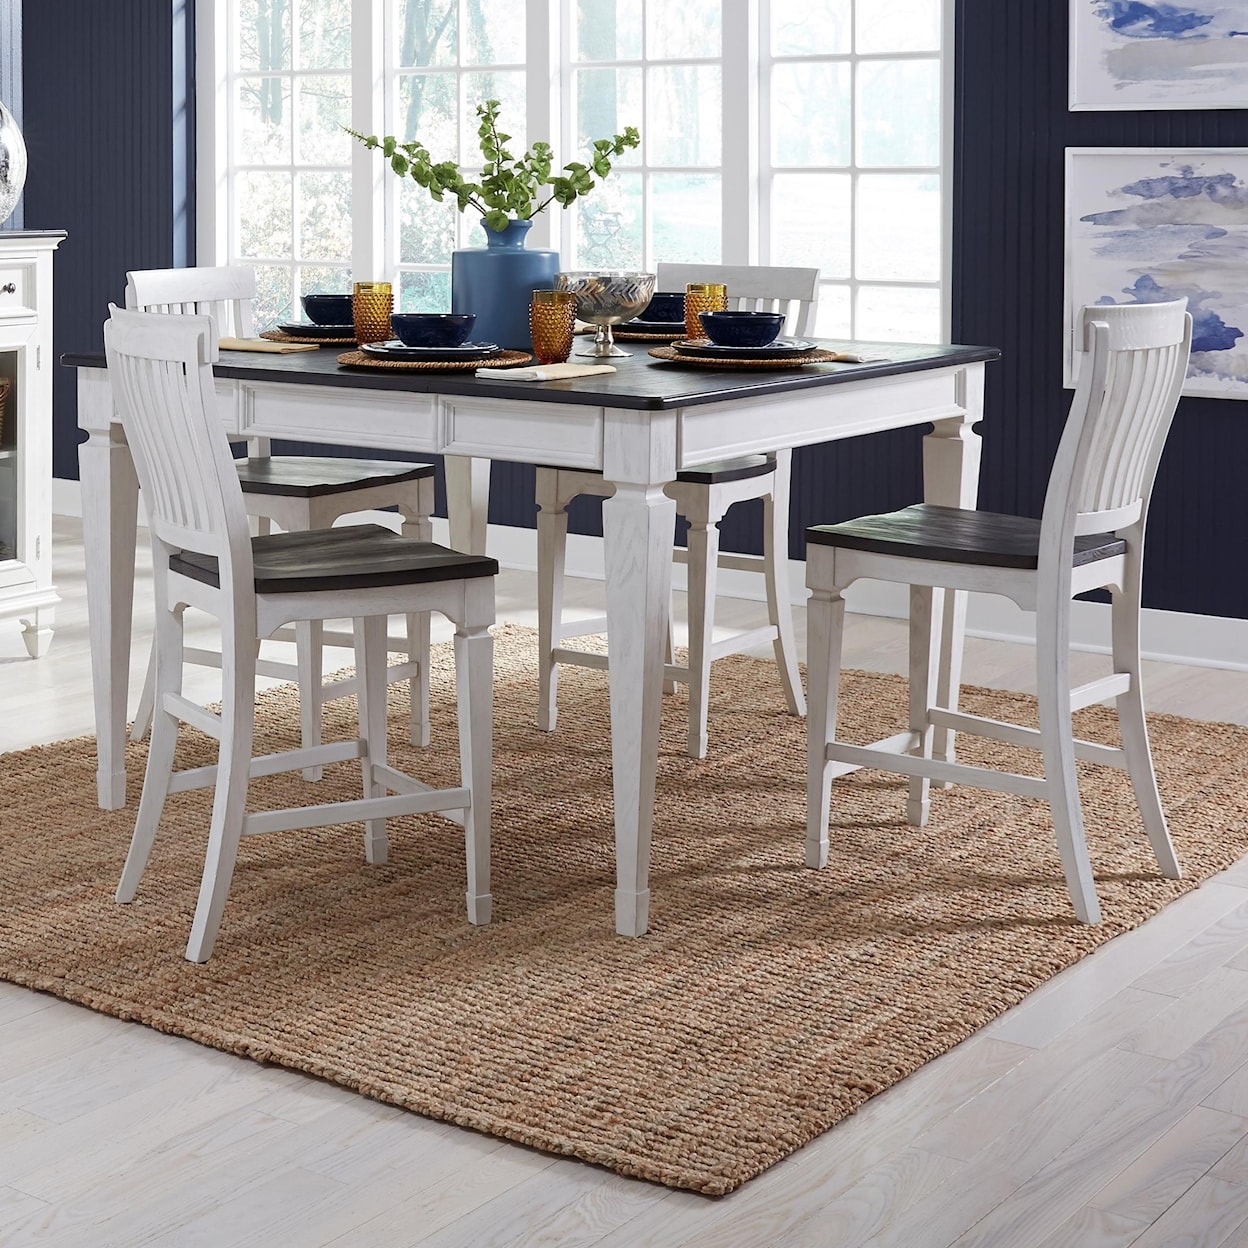 Liberty Furniture Allyson Park 5-Piece Counter-Height Table Set